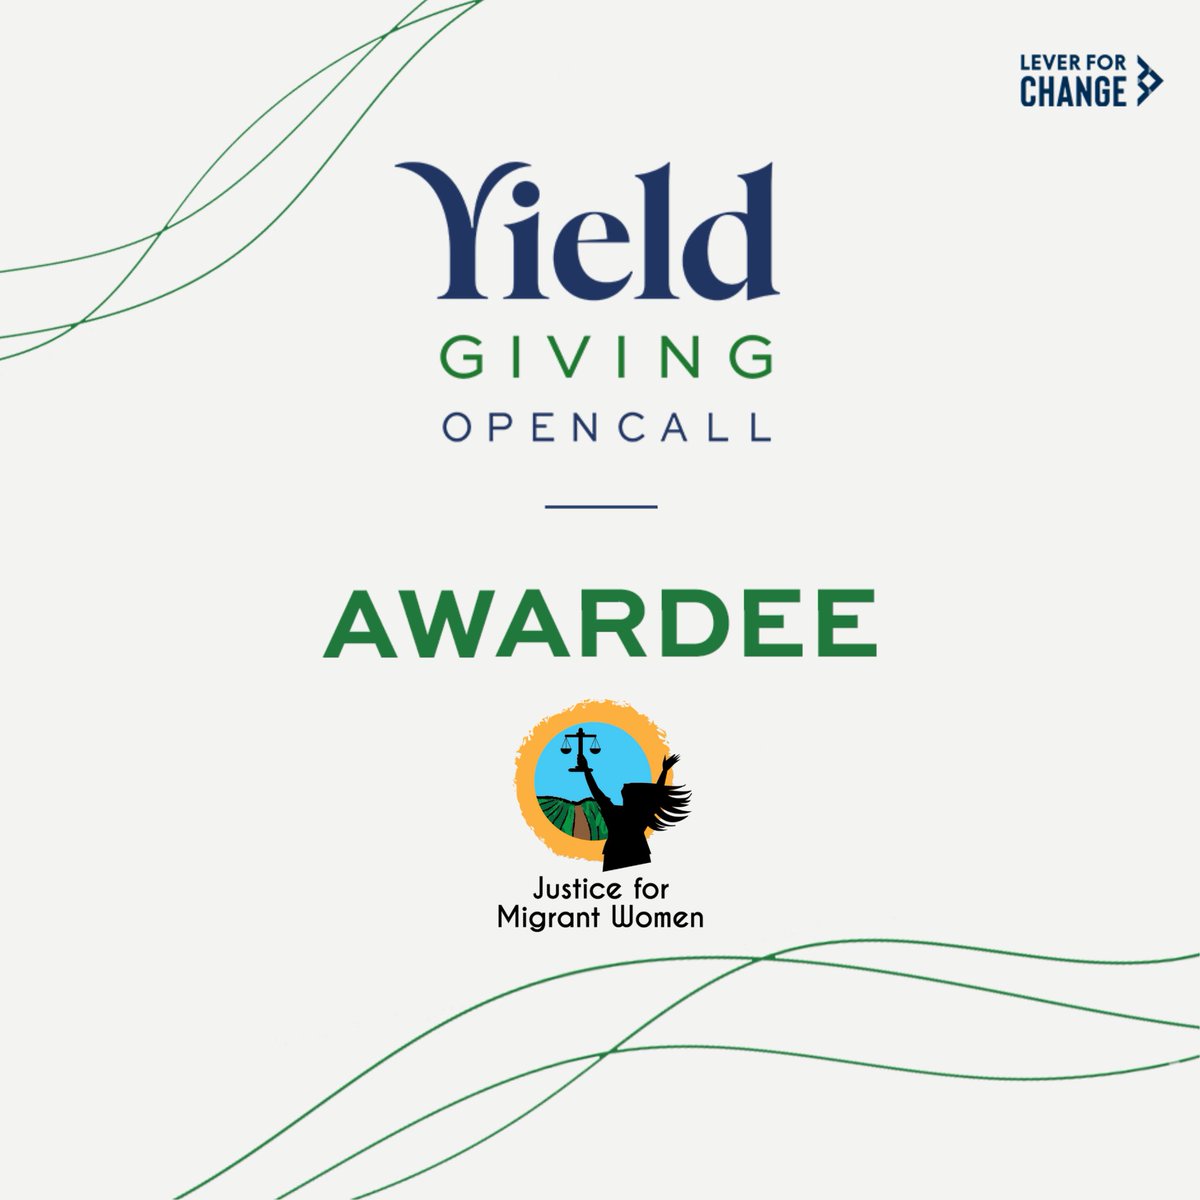 #YieldGiving & @LeverforChange announced the awardees for the #YieldGivingOpenCall – and we are one of them! We’ve received a $2M gift! We are grateful for Yield Giving's support & are proud to be among such incredible org awardees! Learn more: leverforchange.org/challenges/exp…